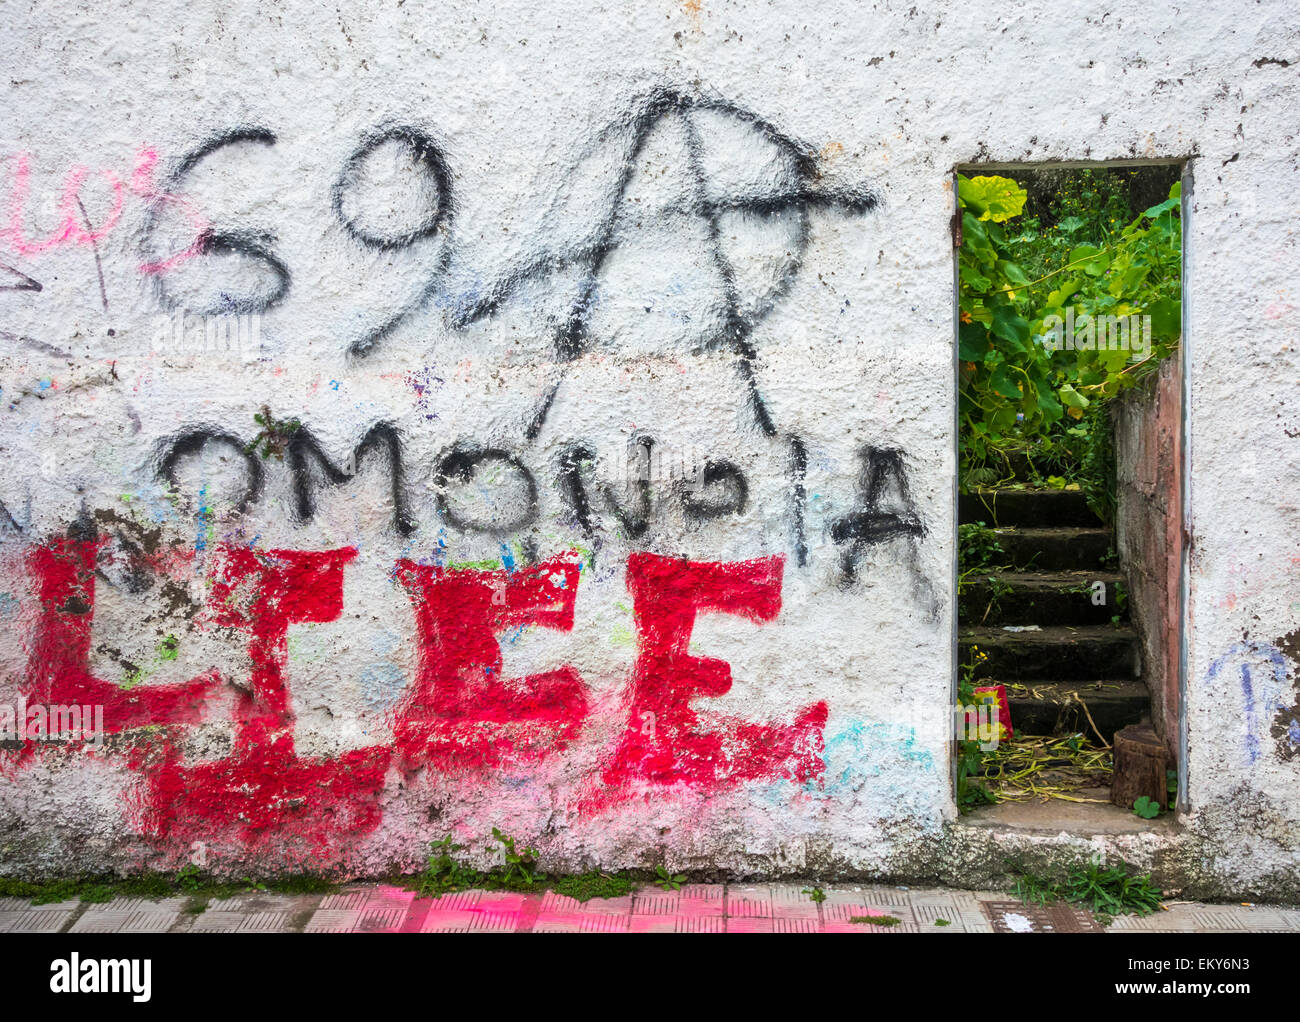 Graffiti on wall of derelict house in La Laguna on Tenerife, Canary Islands, Spain Stock Photo